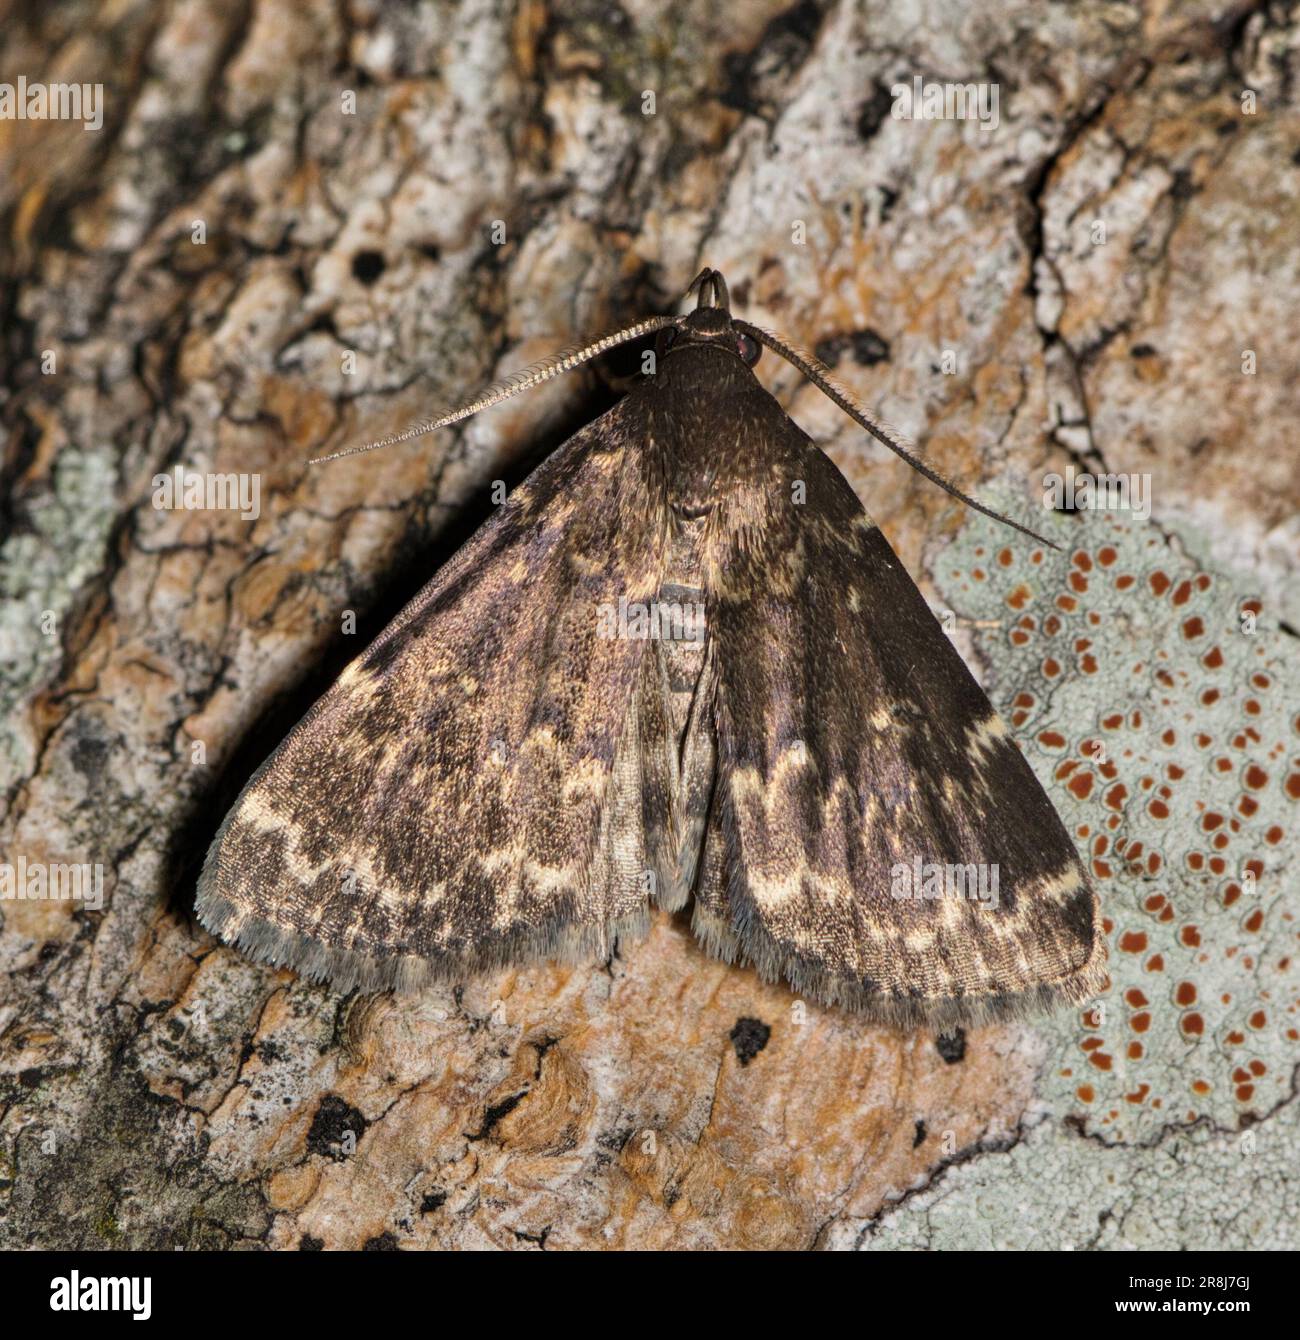 Glossy Black Idia Moth (Idia lubricalis) on pine bark, dorsal view. Species found in the USA and Canada, it feeds on leaf litter, lichen and fungi. Stock Photo